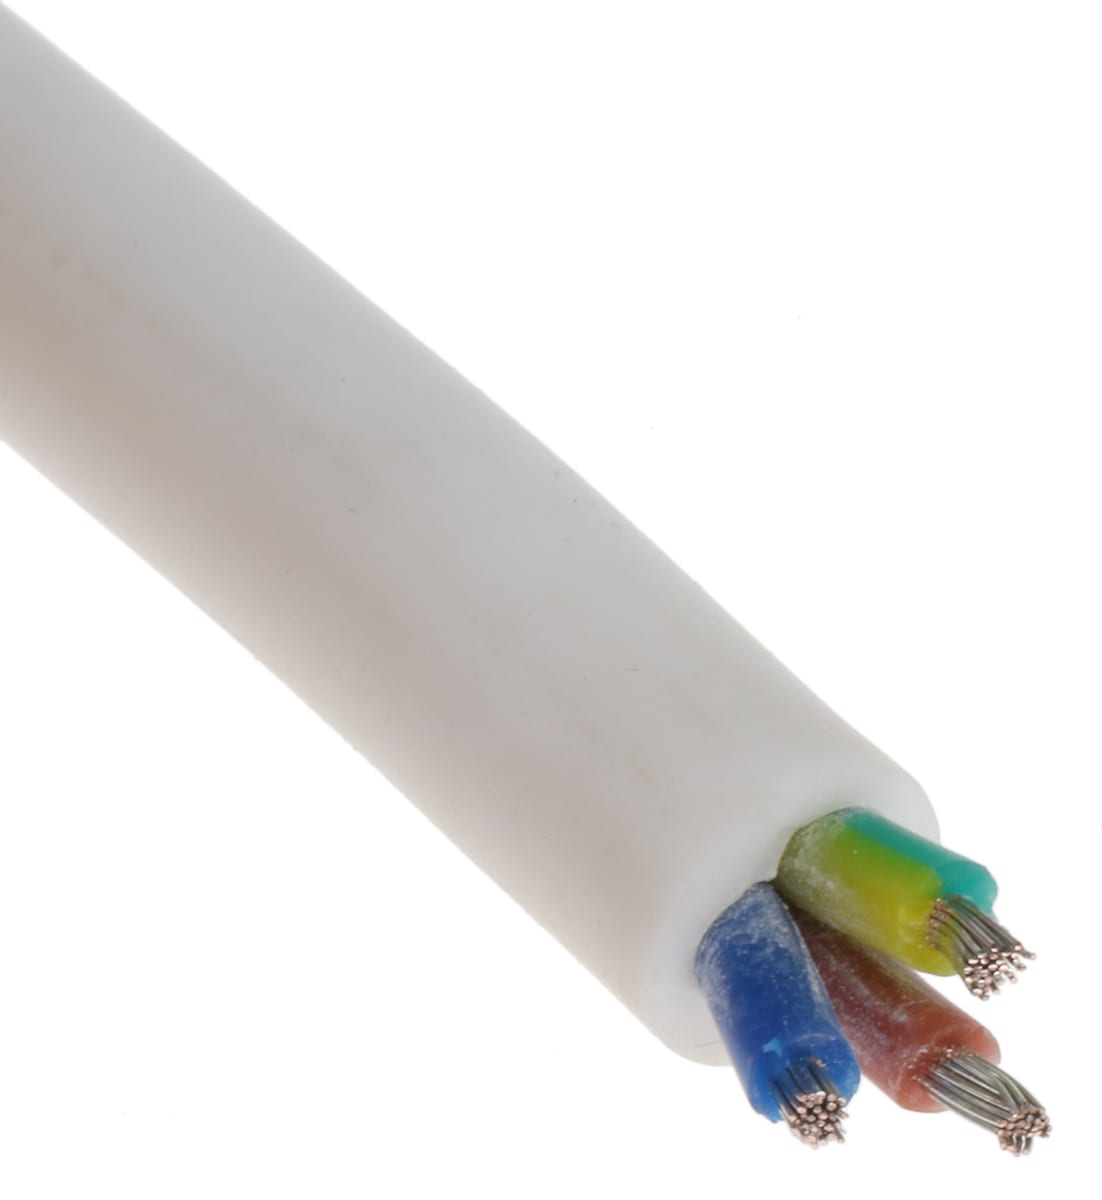 Electrical Wiring Color Codes for AC & DC - NEC & IEC